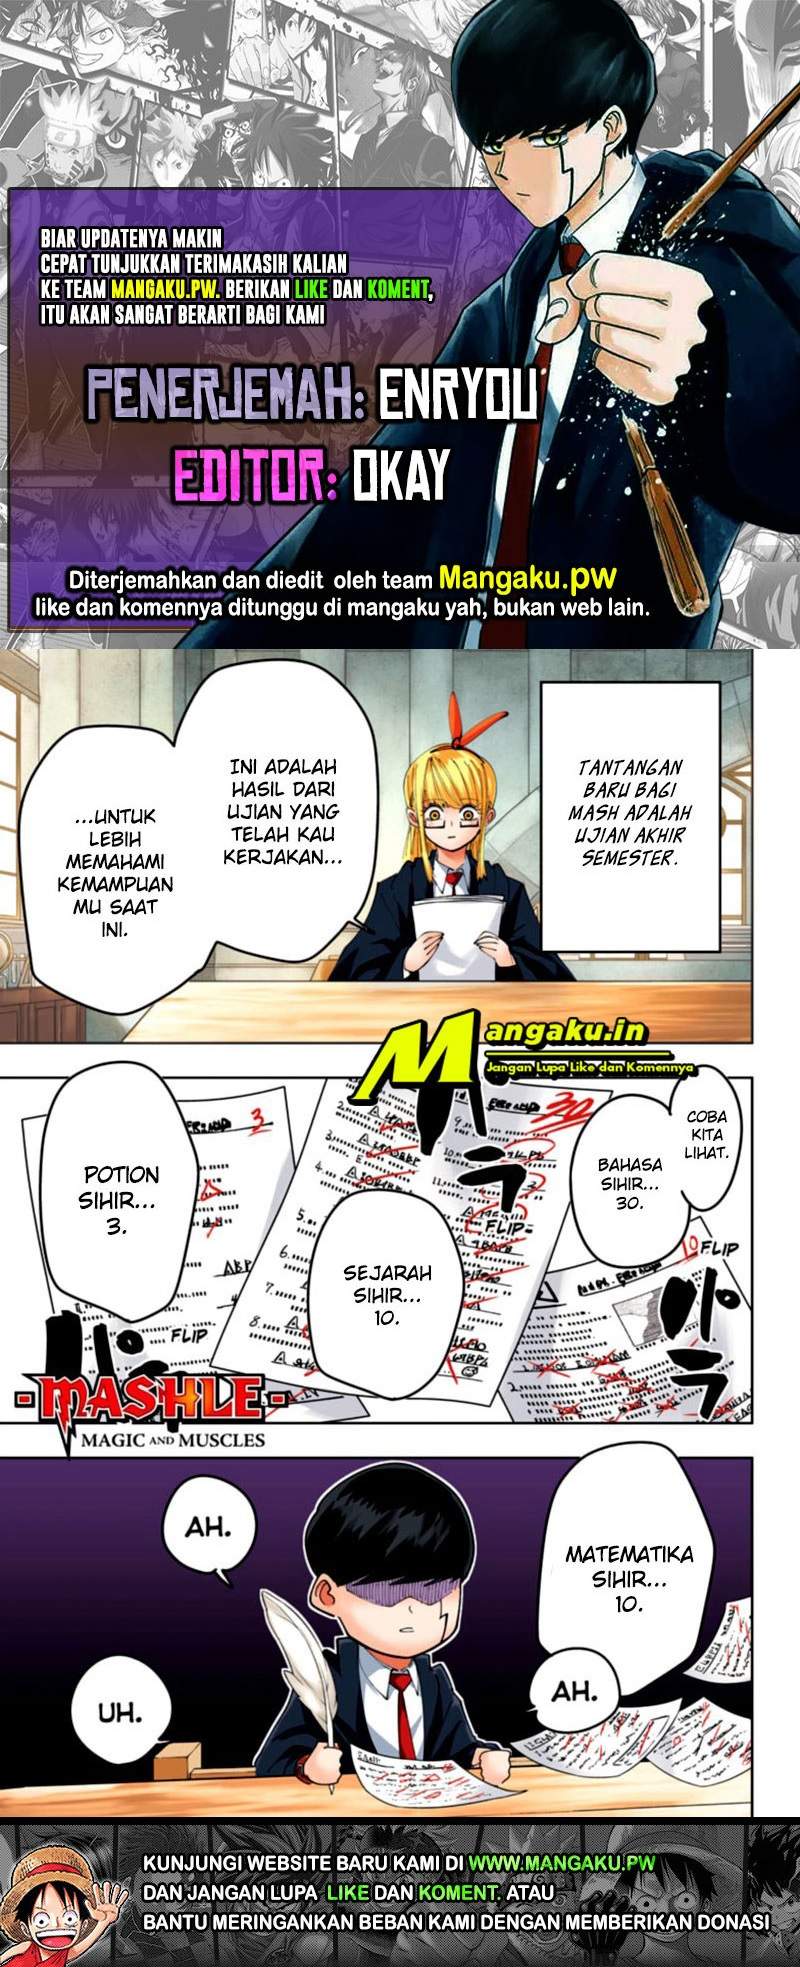 Mashle: Magic And Muscles Chapter 74 - 91